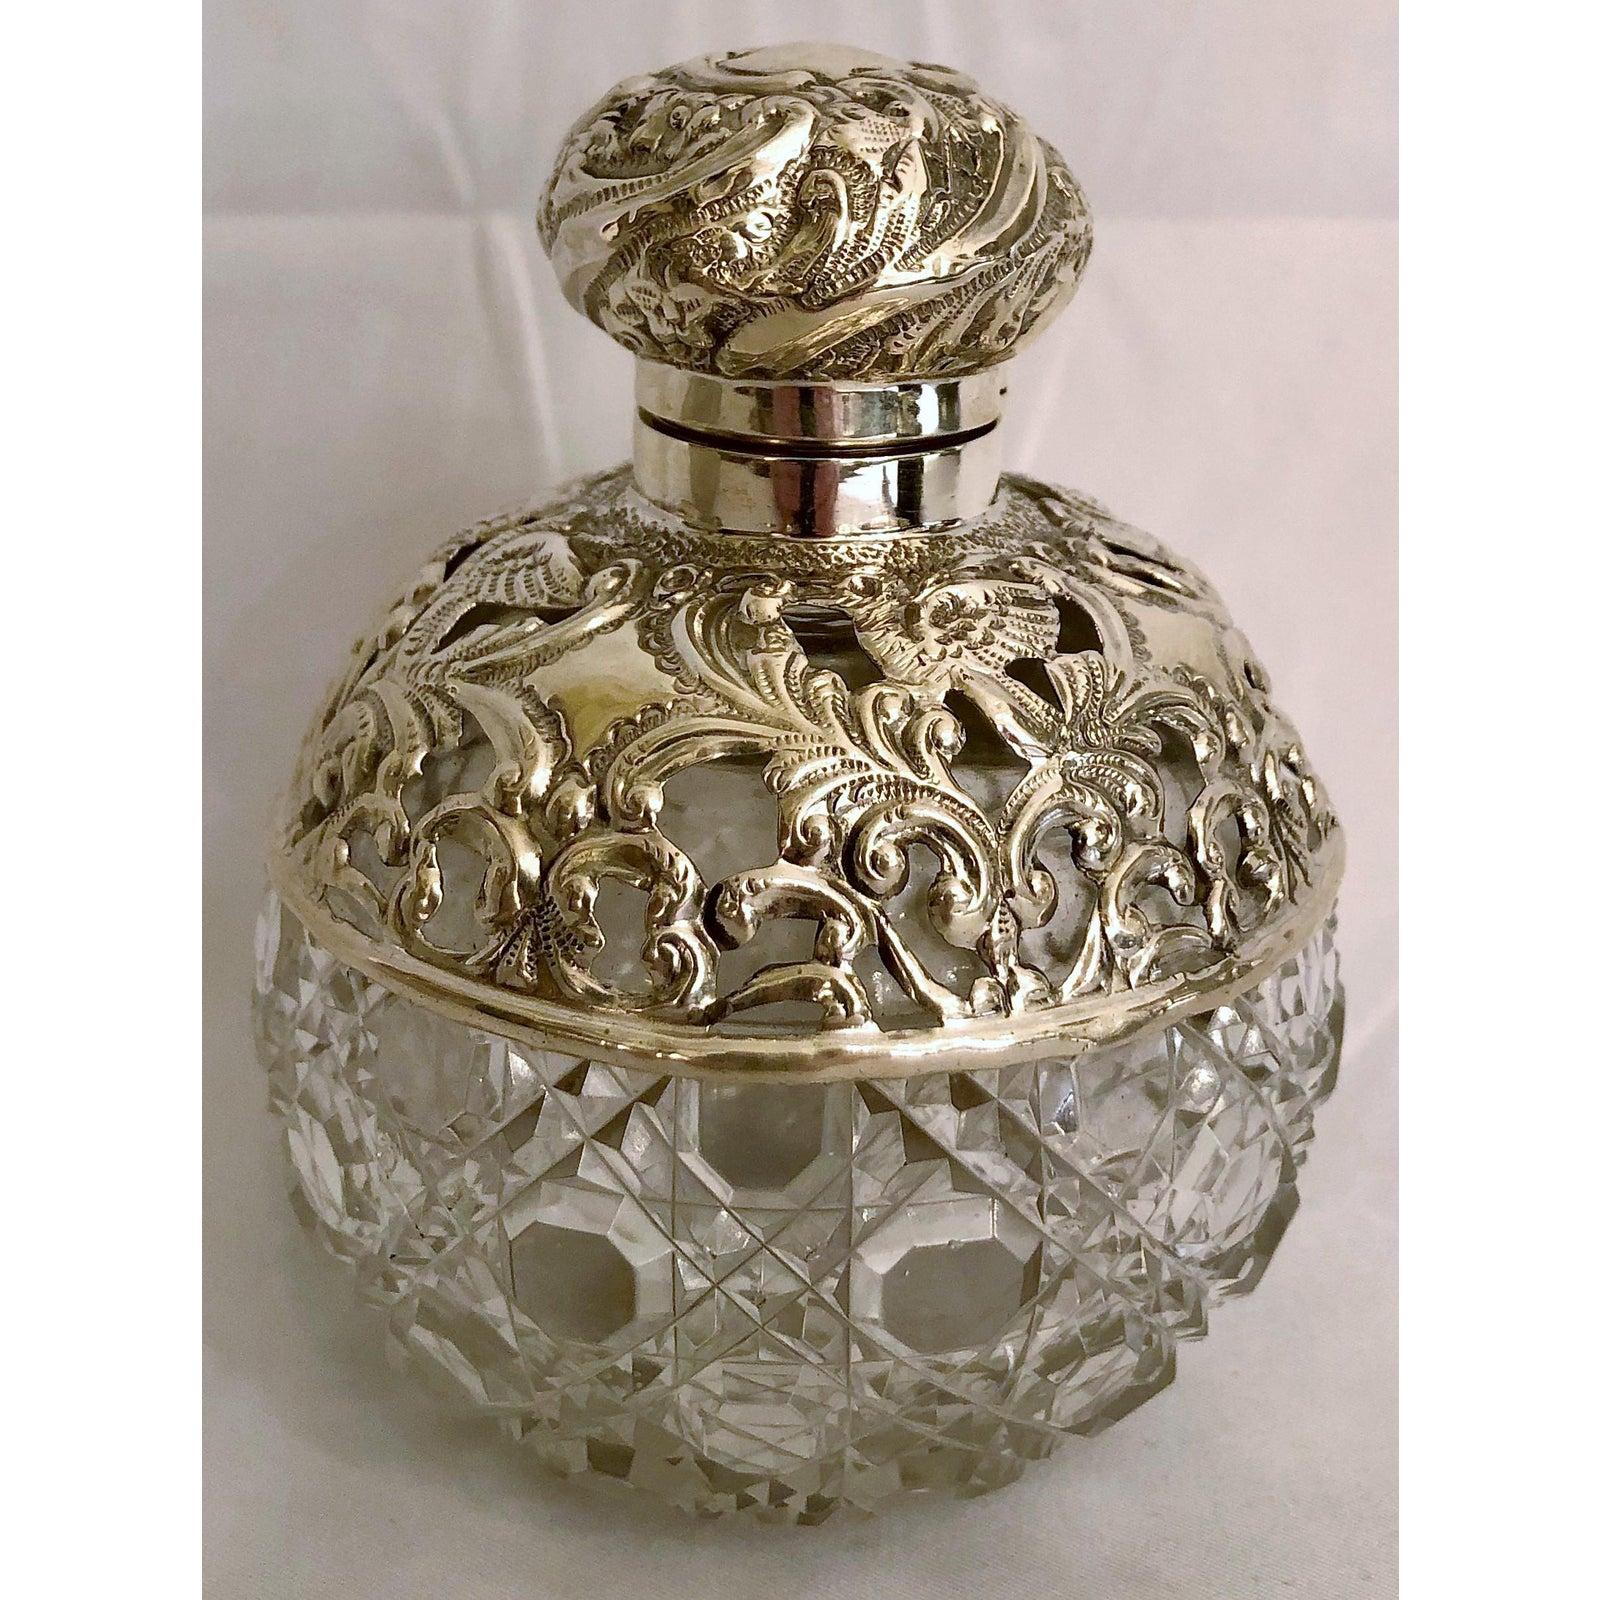 Antique Edwardian sterling silver mounted cut crystal perfume bottle, circa 1900.
 